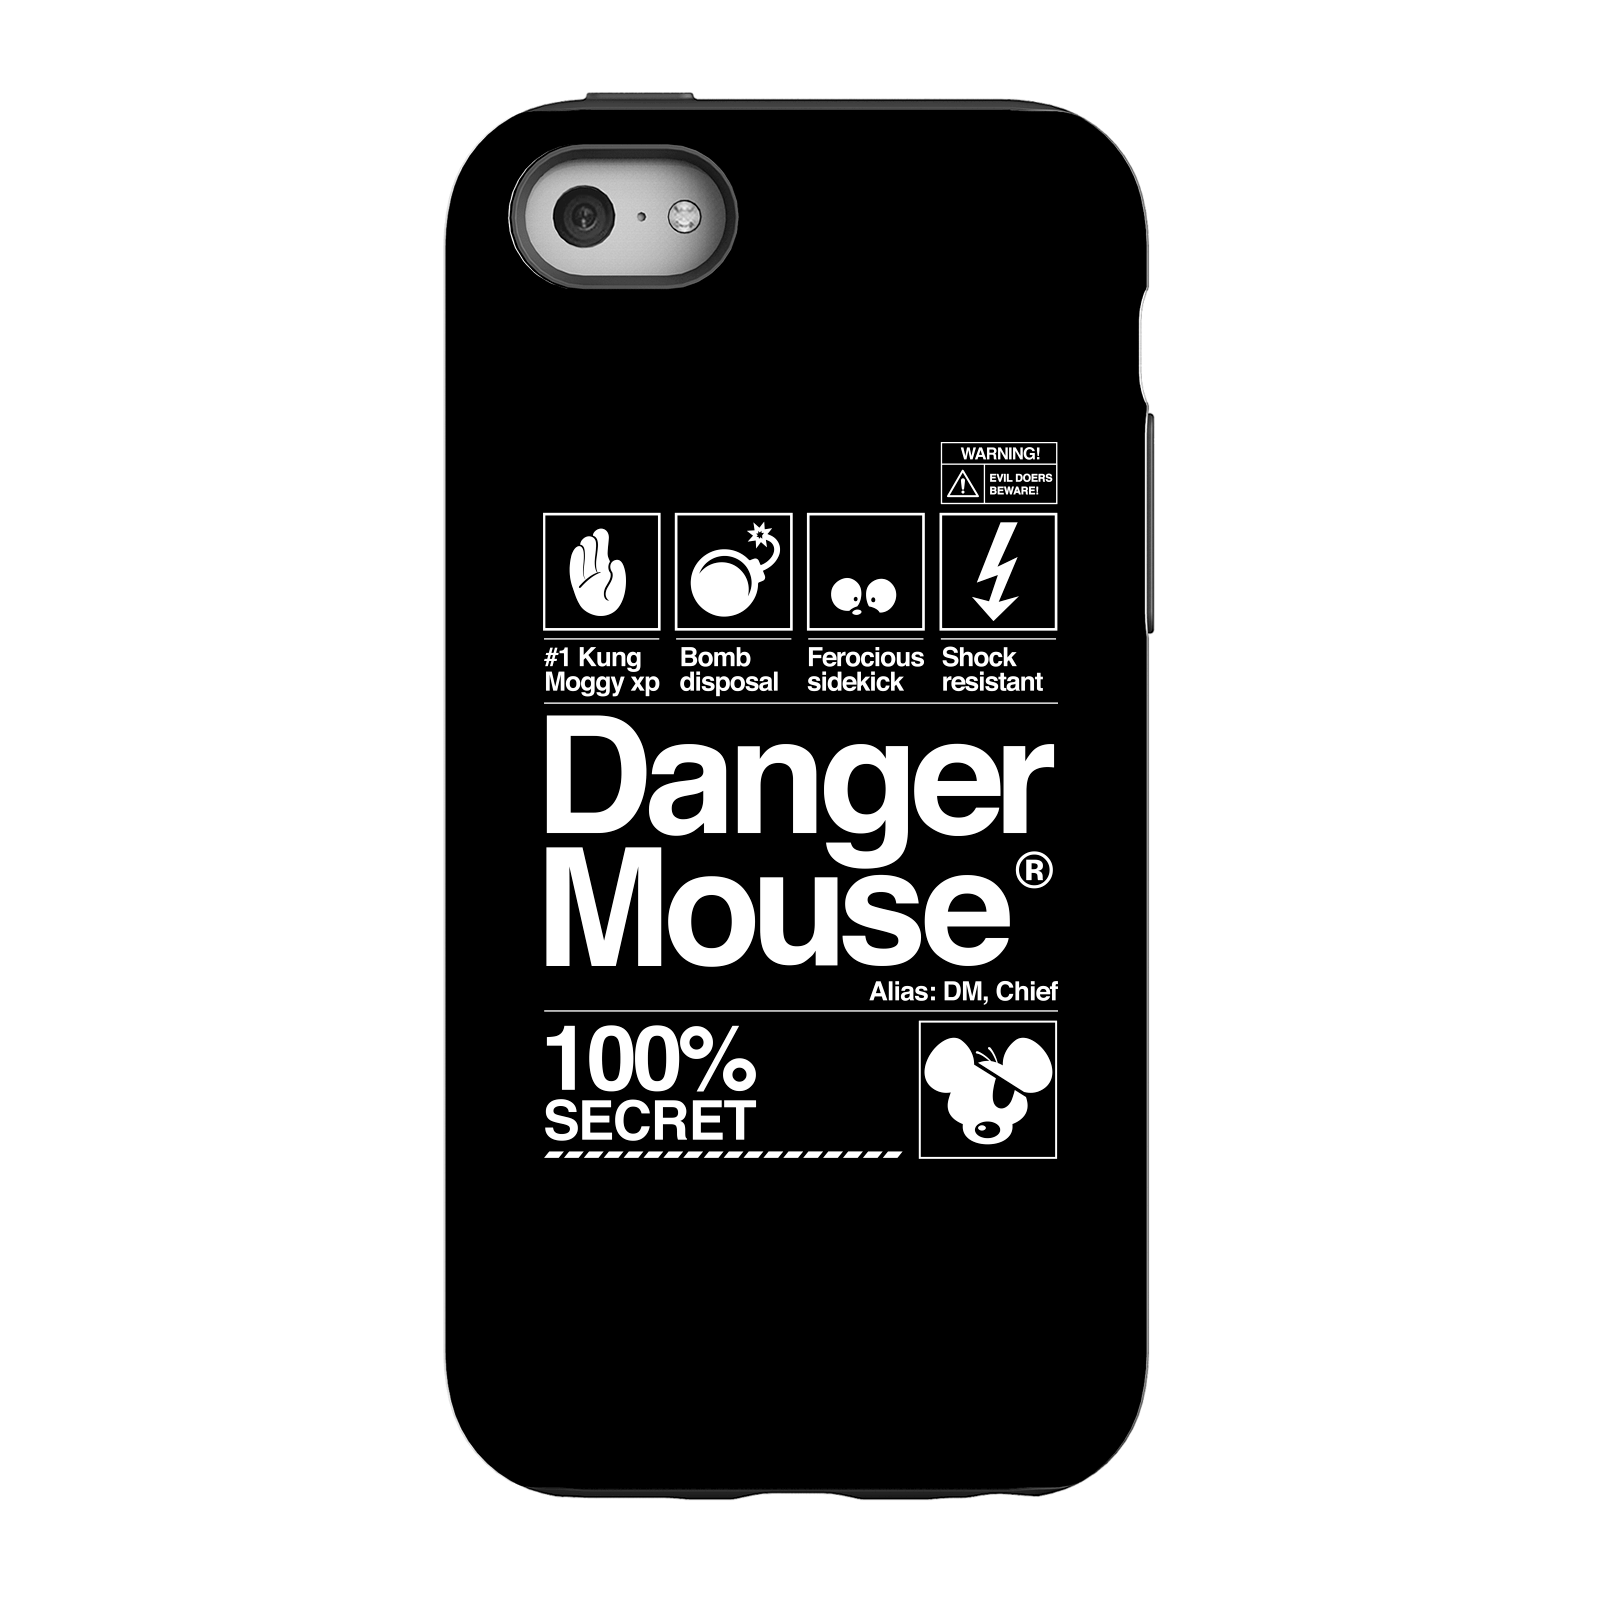 Danger Mouse 100% Secret Phone Case for iPhone and Android - iPhone 5C - Tough Case - Matte